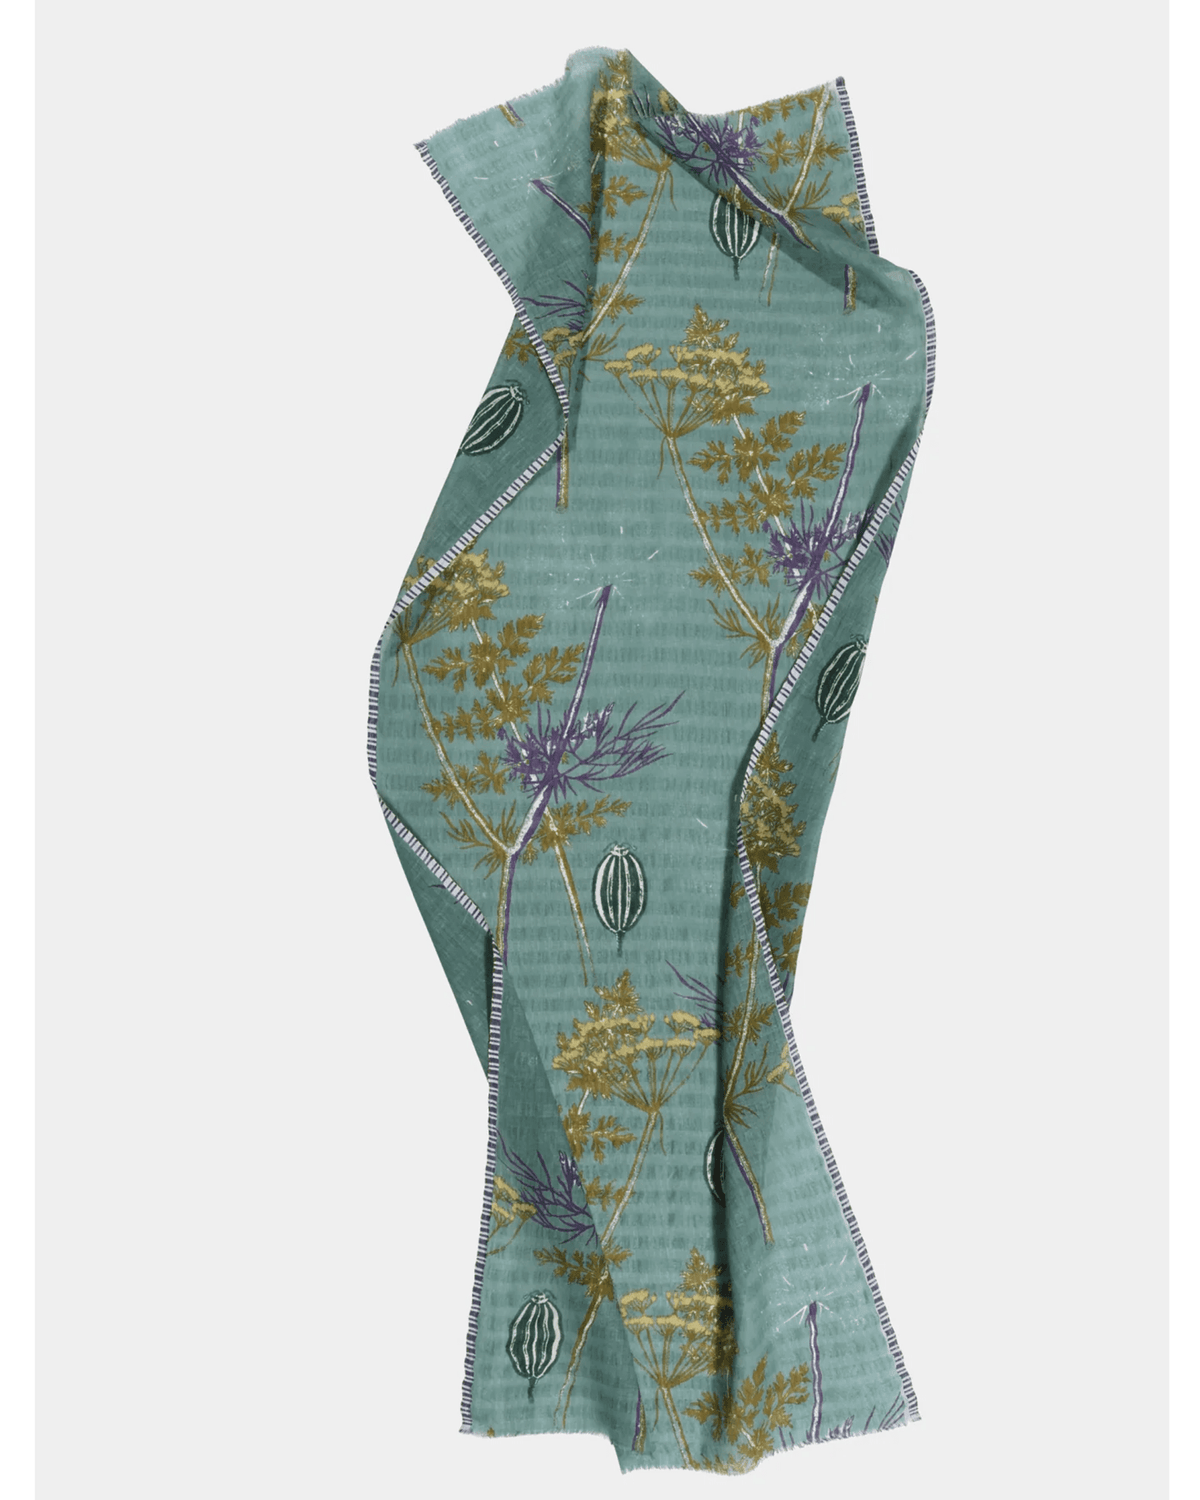 Épice Accessories Turquoise Flora Danica Scarf in Turquoise